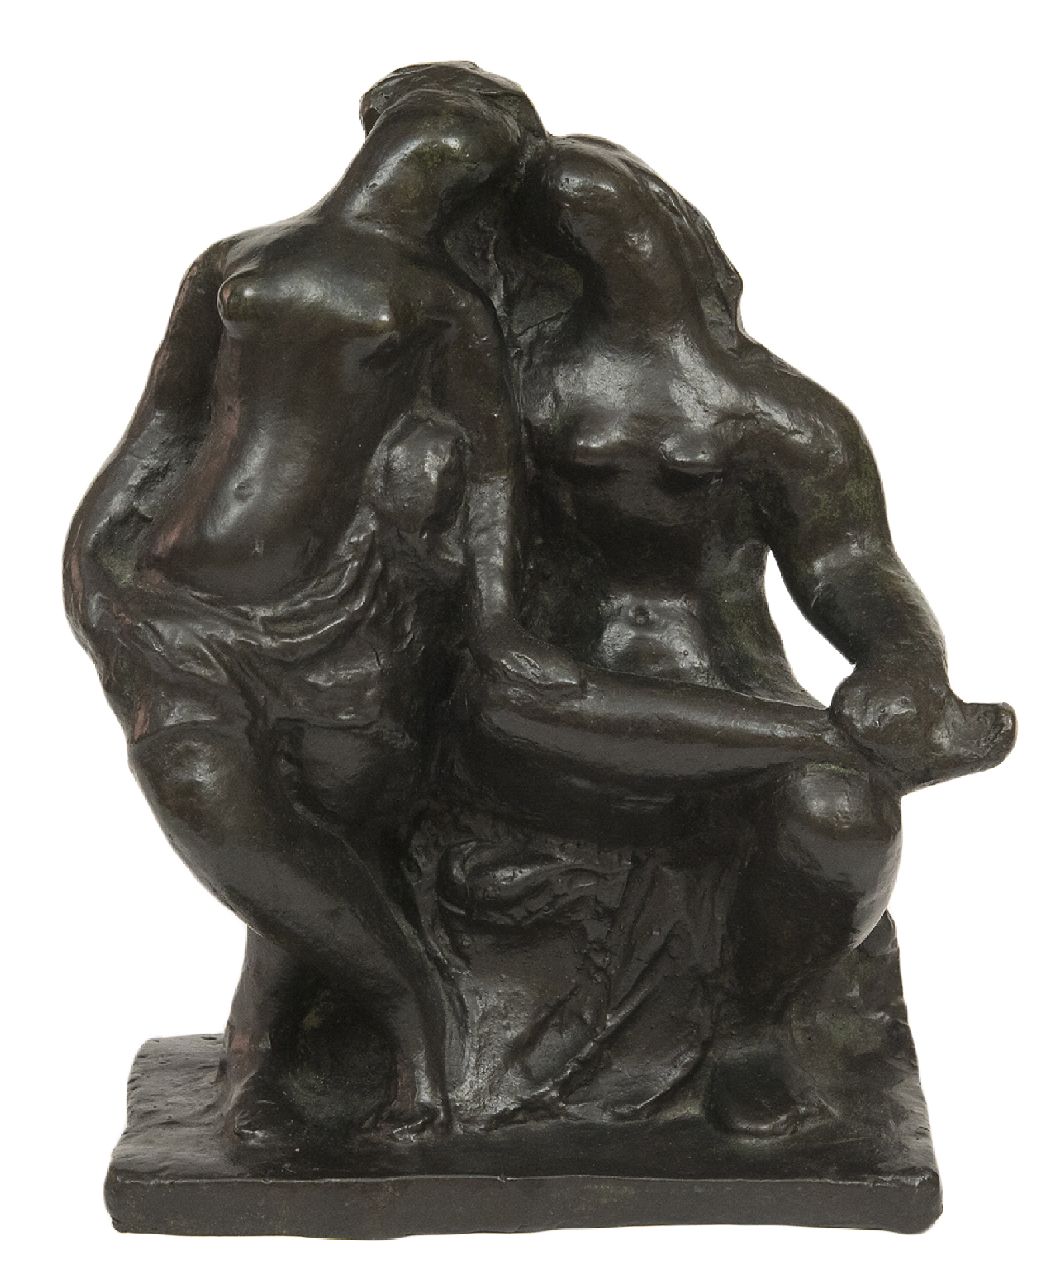 Pallandt Ch.D. van | Charlotte Dorothée van Pallandt | Sculptures and objects offered for sale | Two girlfriends, bronze 21.9 x 18.6 cm, signed on the side of the base and executed ca. 1941